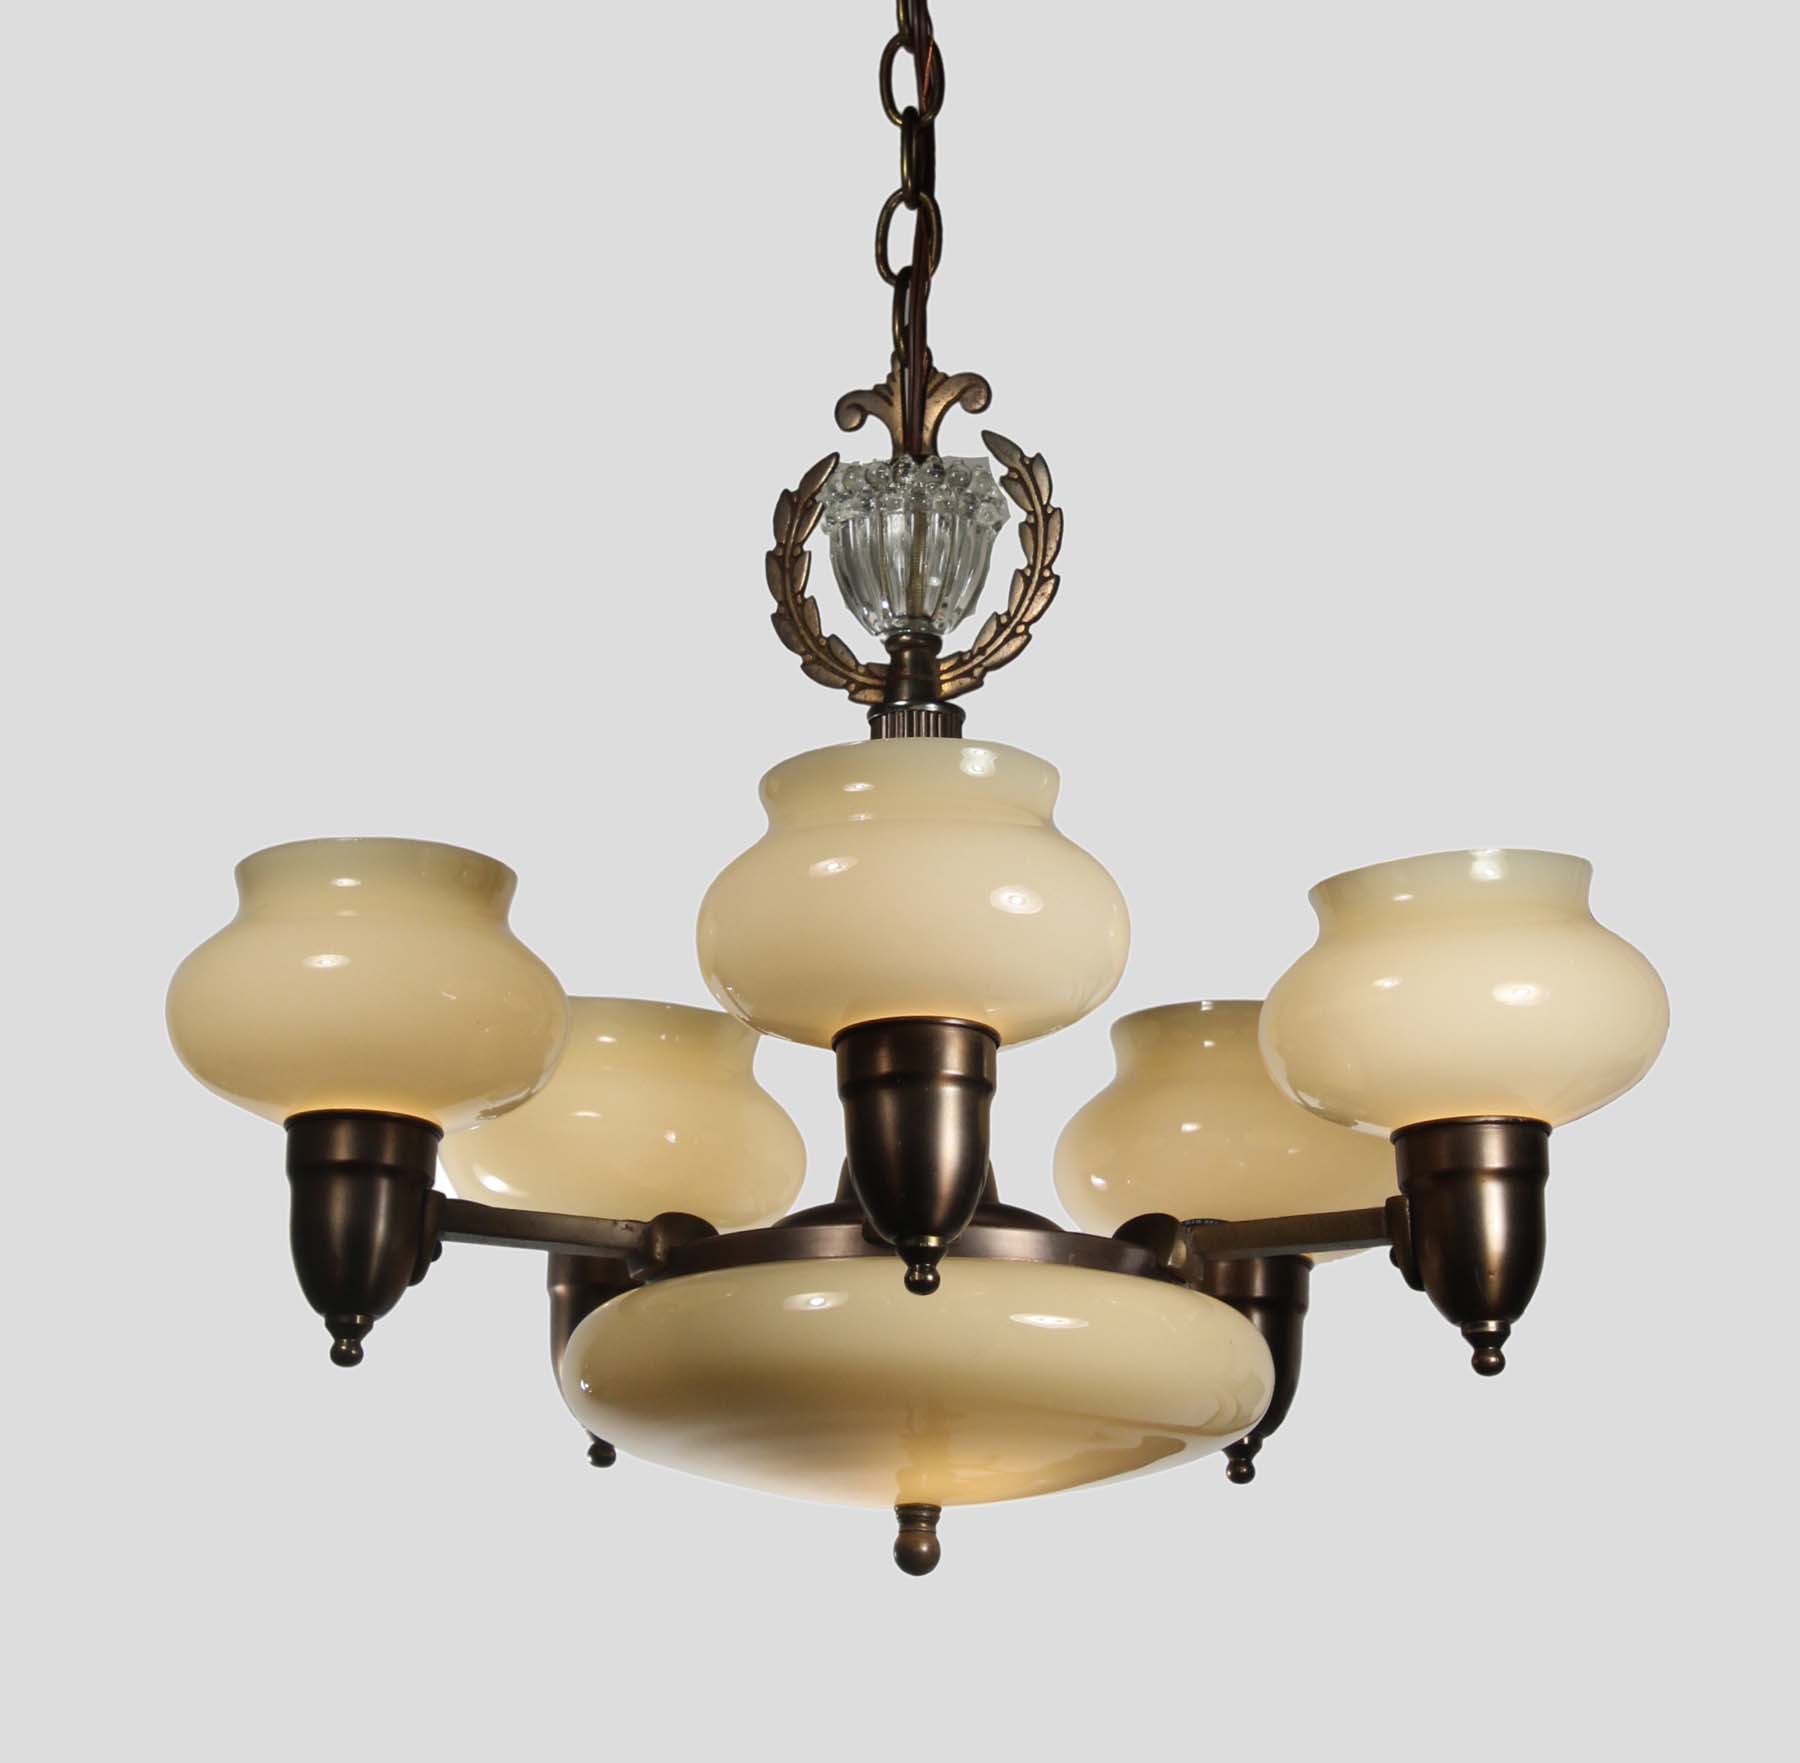 SOLD Chandelier with Original Sit-In Shades, Antique Lighting-68443